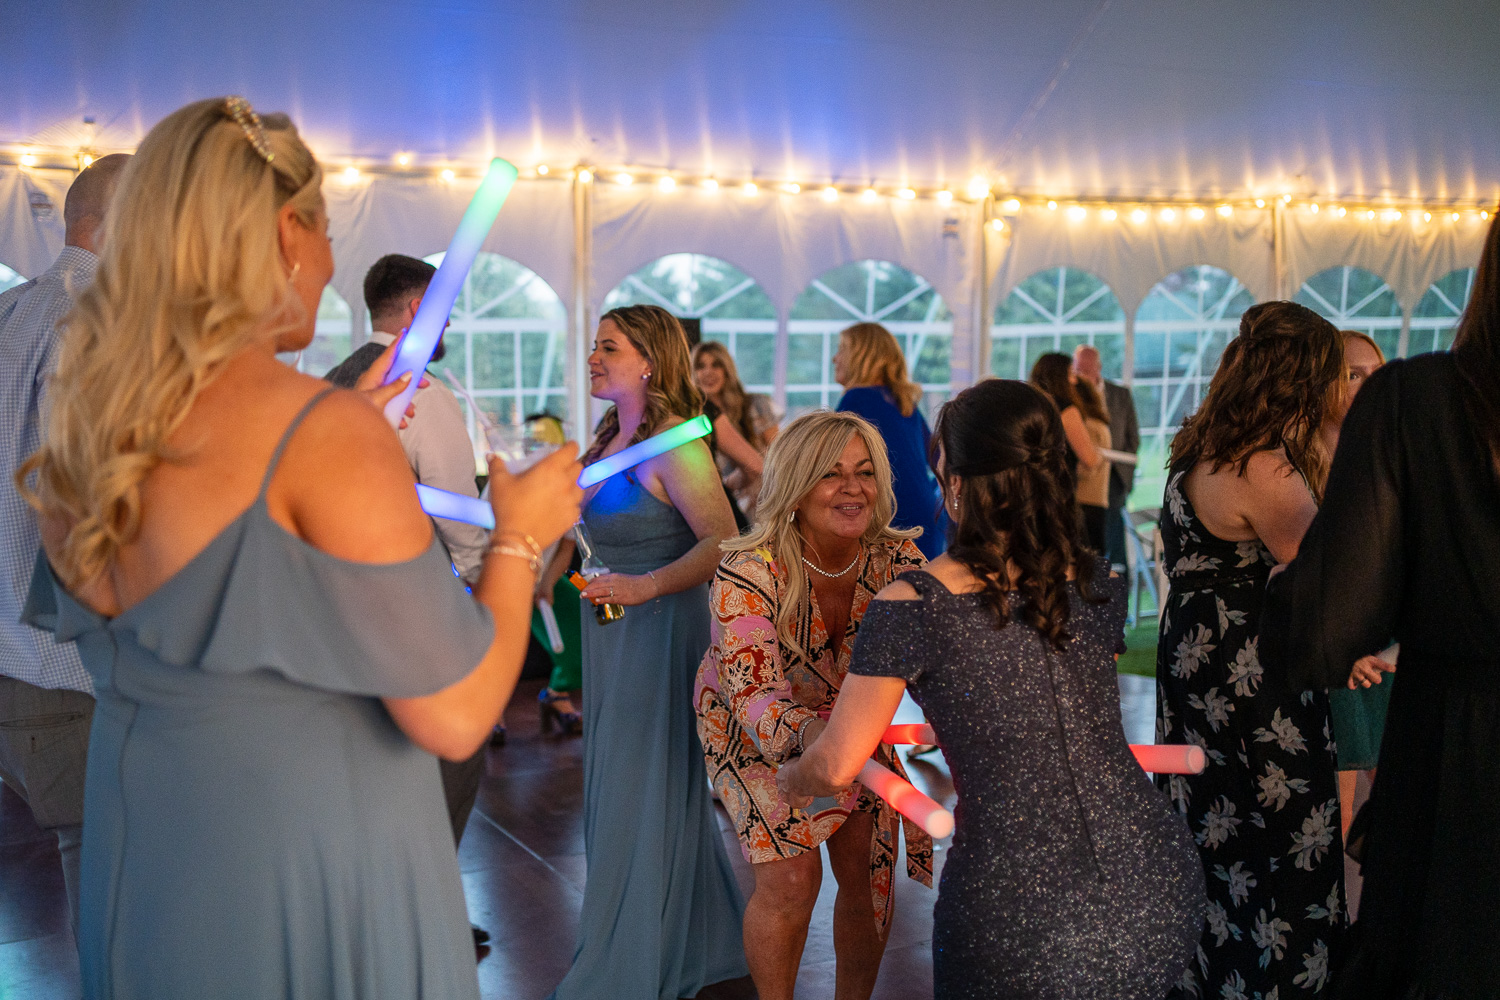 Glow sticks and Dancing at the reception of the lakeside wedding